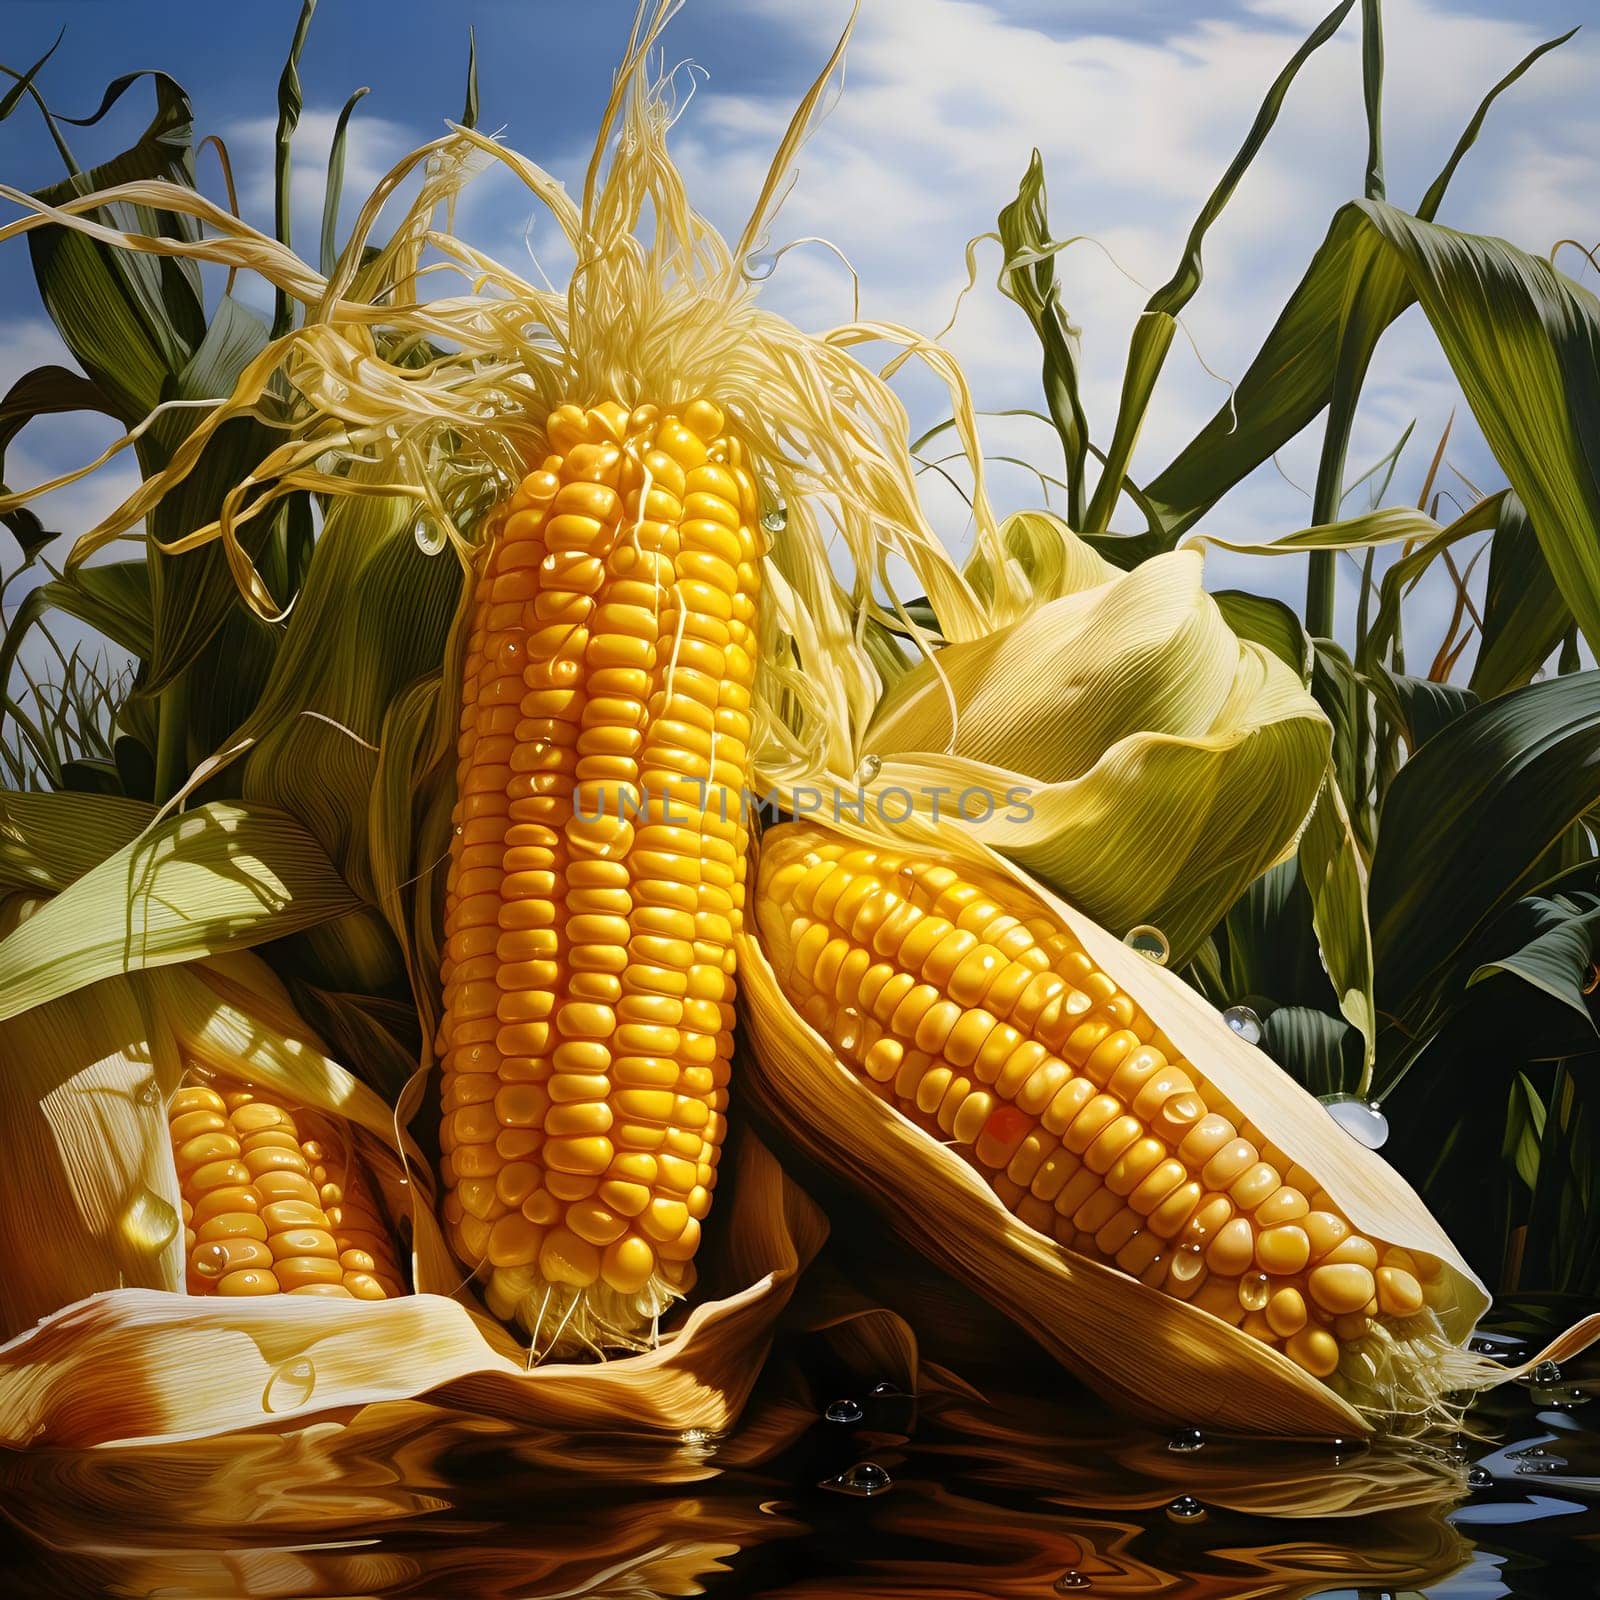 Three big yellow corn cobs over water. Corn as a dish of thanksgiving for the harvest. An atmosphere of joy and celebration.